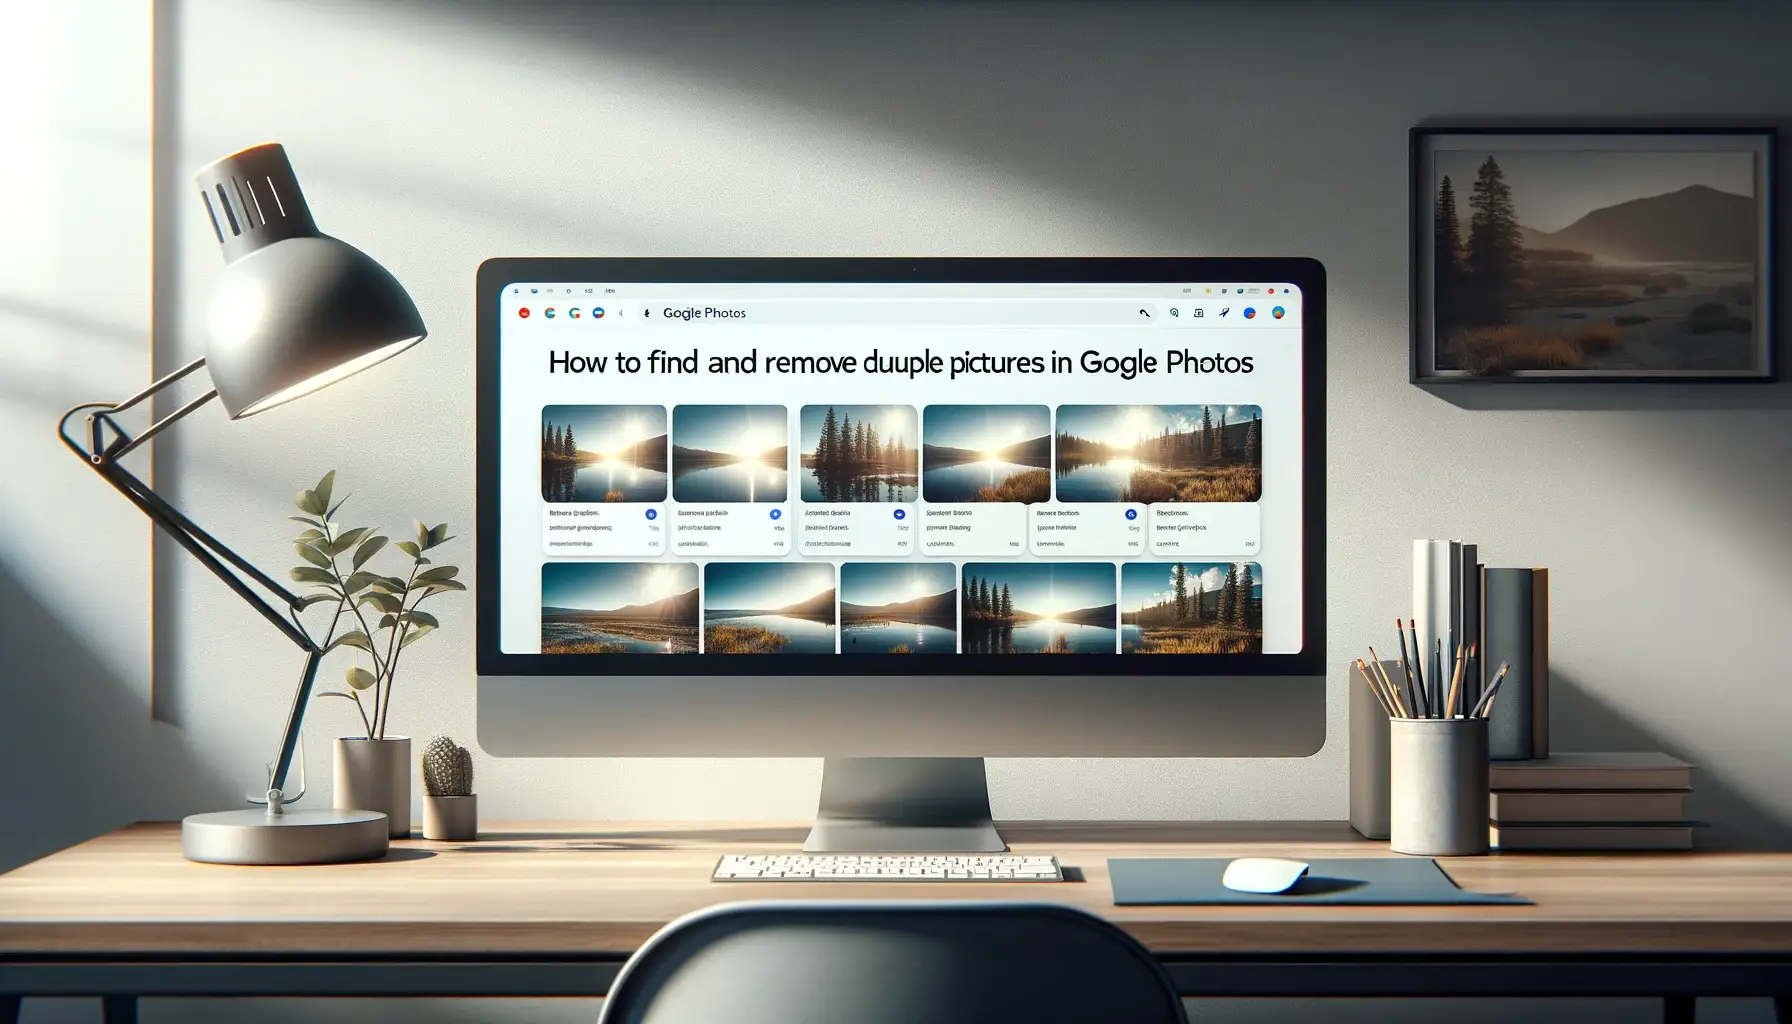 How to Find and Remove Duplicate Pictures in Google Photos